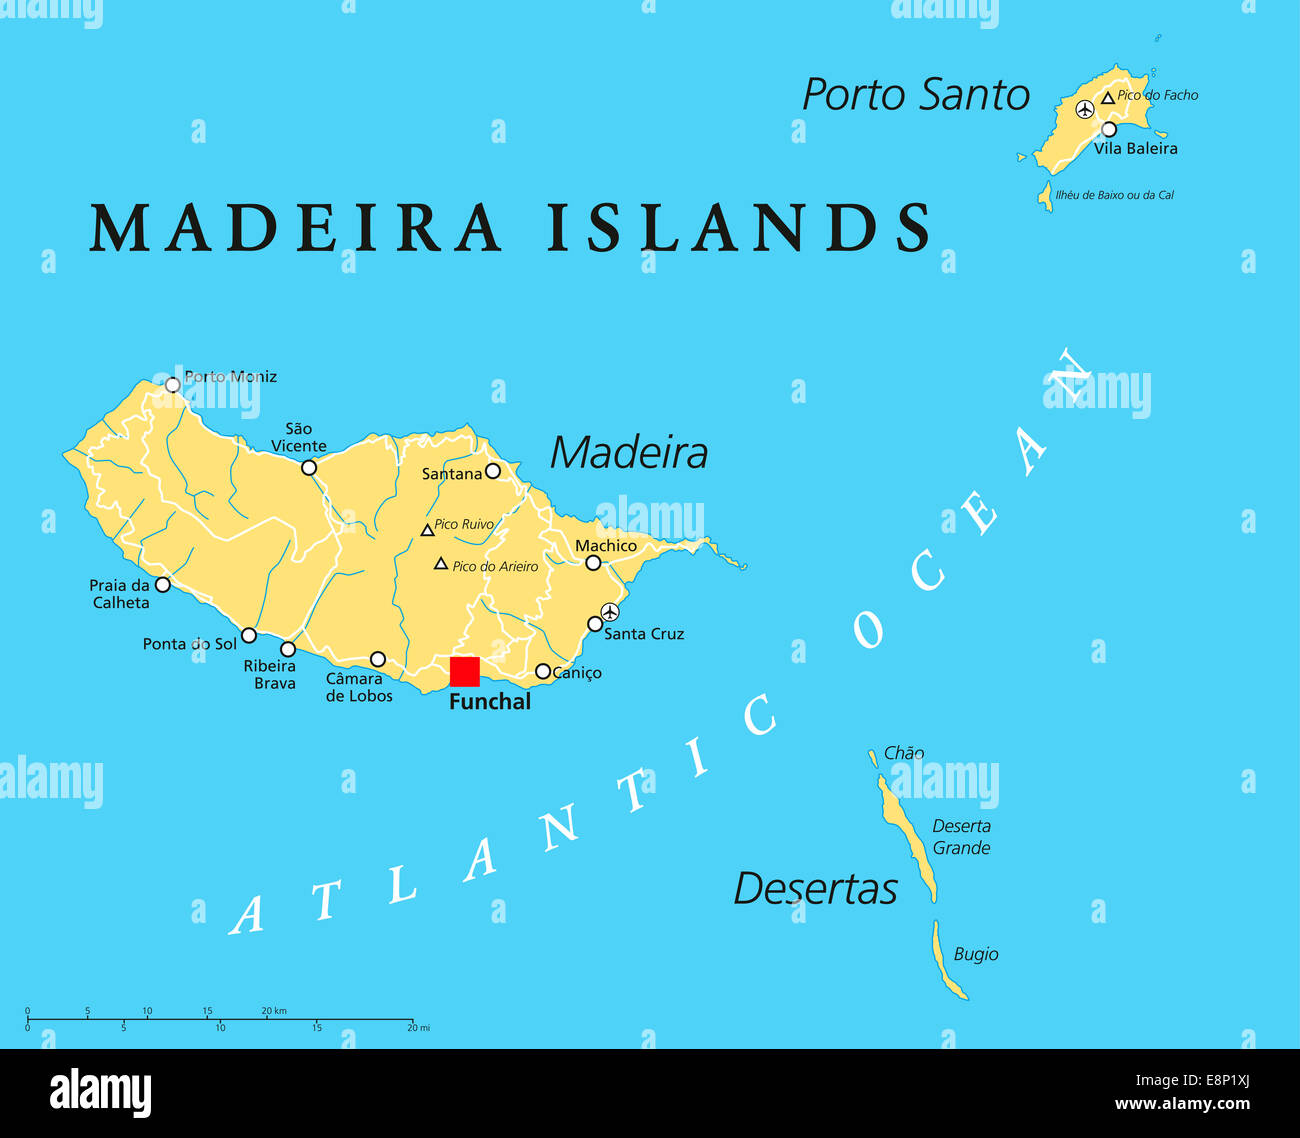 Madeira Islands Political Map with Madeira, Porto Santo and Desertas. English labeling and scaling. Stock Photo